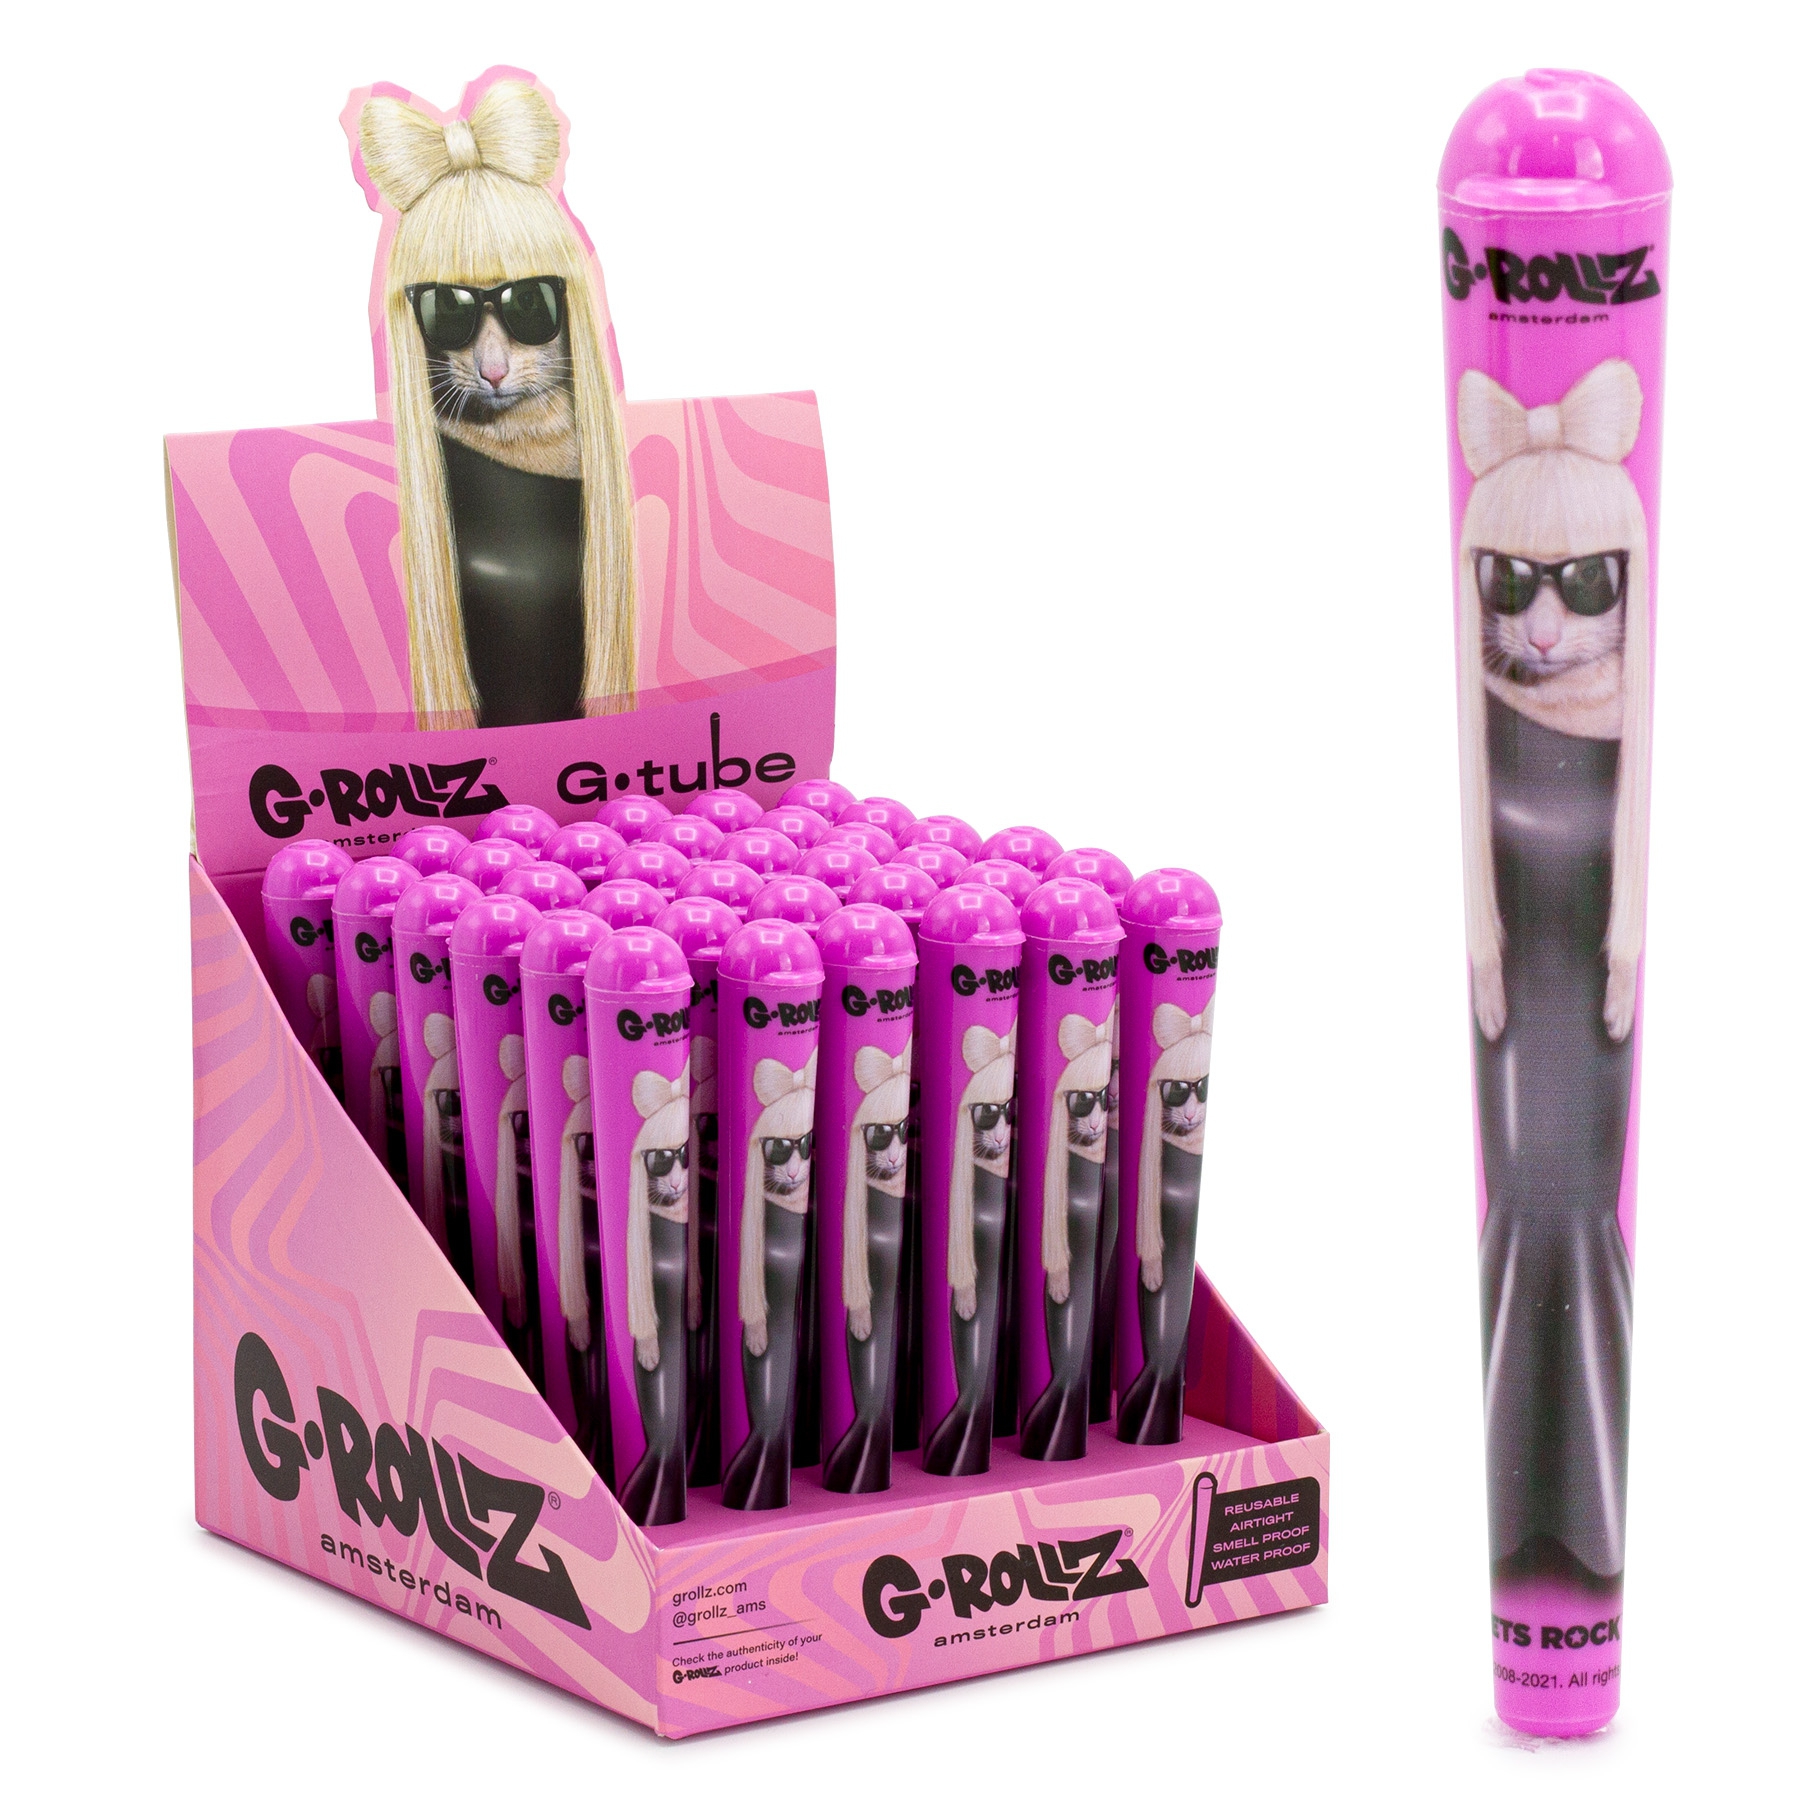 G-ROLLZ Joint G-tube GG Pink